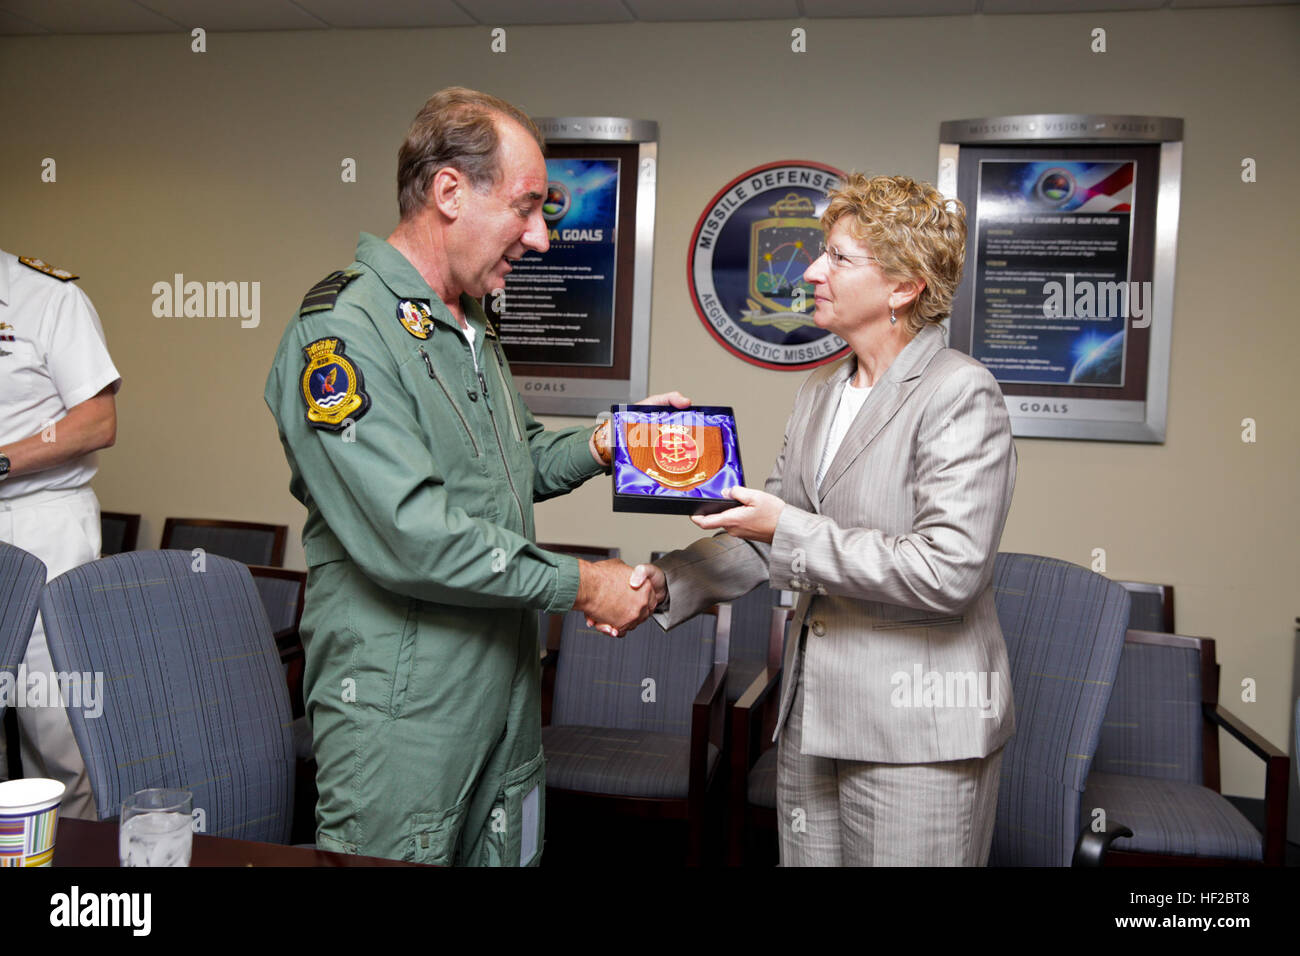 The First Sea Lord and Chief of Naval Staff of the British Royal Navy, Adm. Sir George Zambellas, left, presents a gift to Laura DeSimone at the Missile Defense Agency at Dahlgren, Va., July 29, 2014. Zambellas is taking part in the Commandant of the Marine Corps' Counterpart Program, which invites foreign military leaders to visit the United States and interact with U.S. military leaders. (U.S. Marine Corps photo by Cpl. Michael C. Guinto/Released) First Sea Lord Counterpart Visit 140729-M-LI307-488 Stock Photo